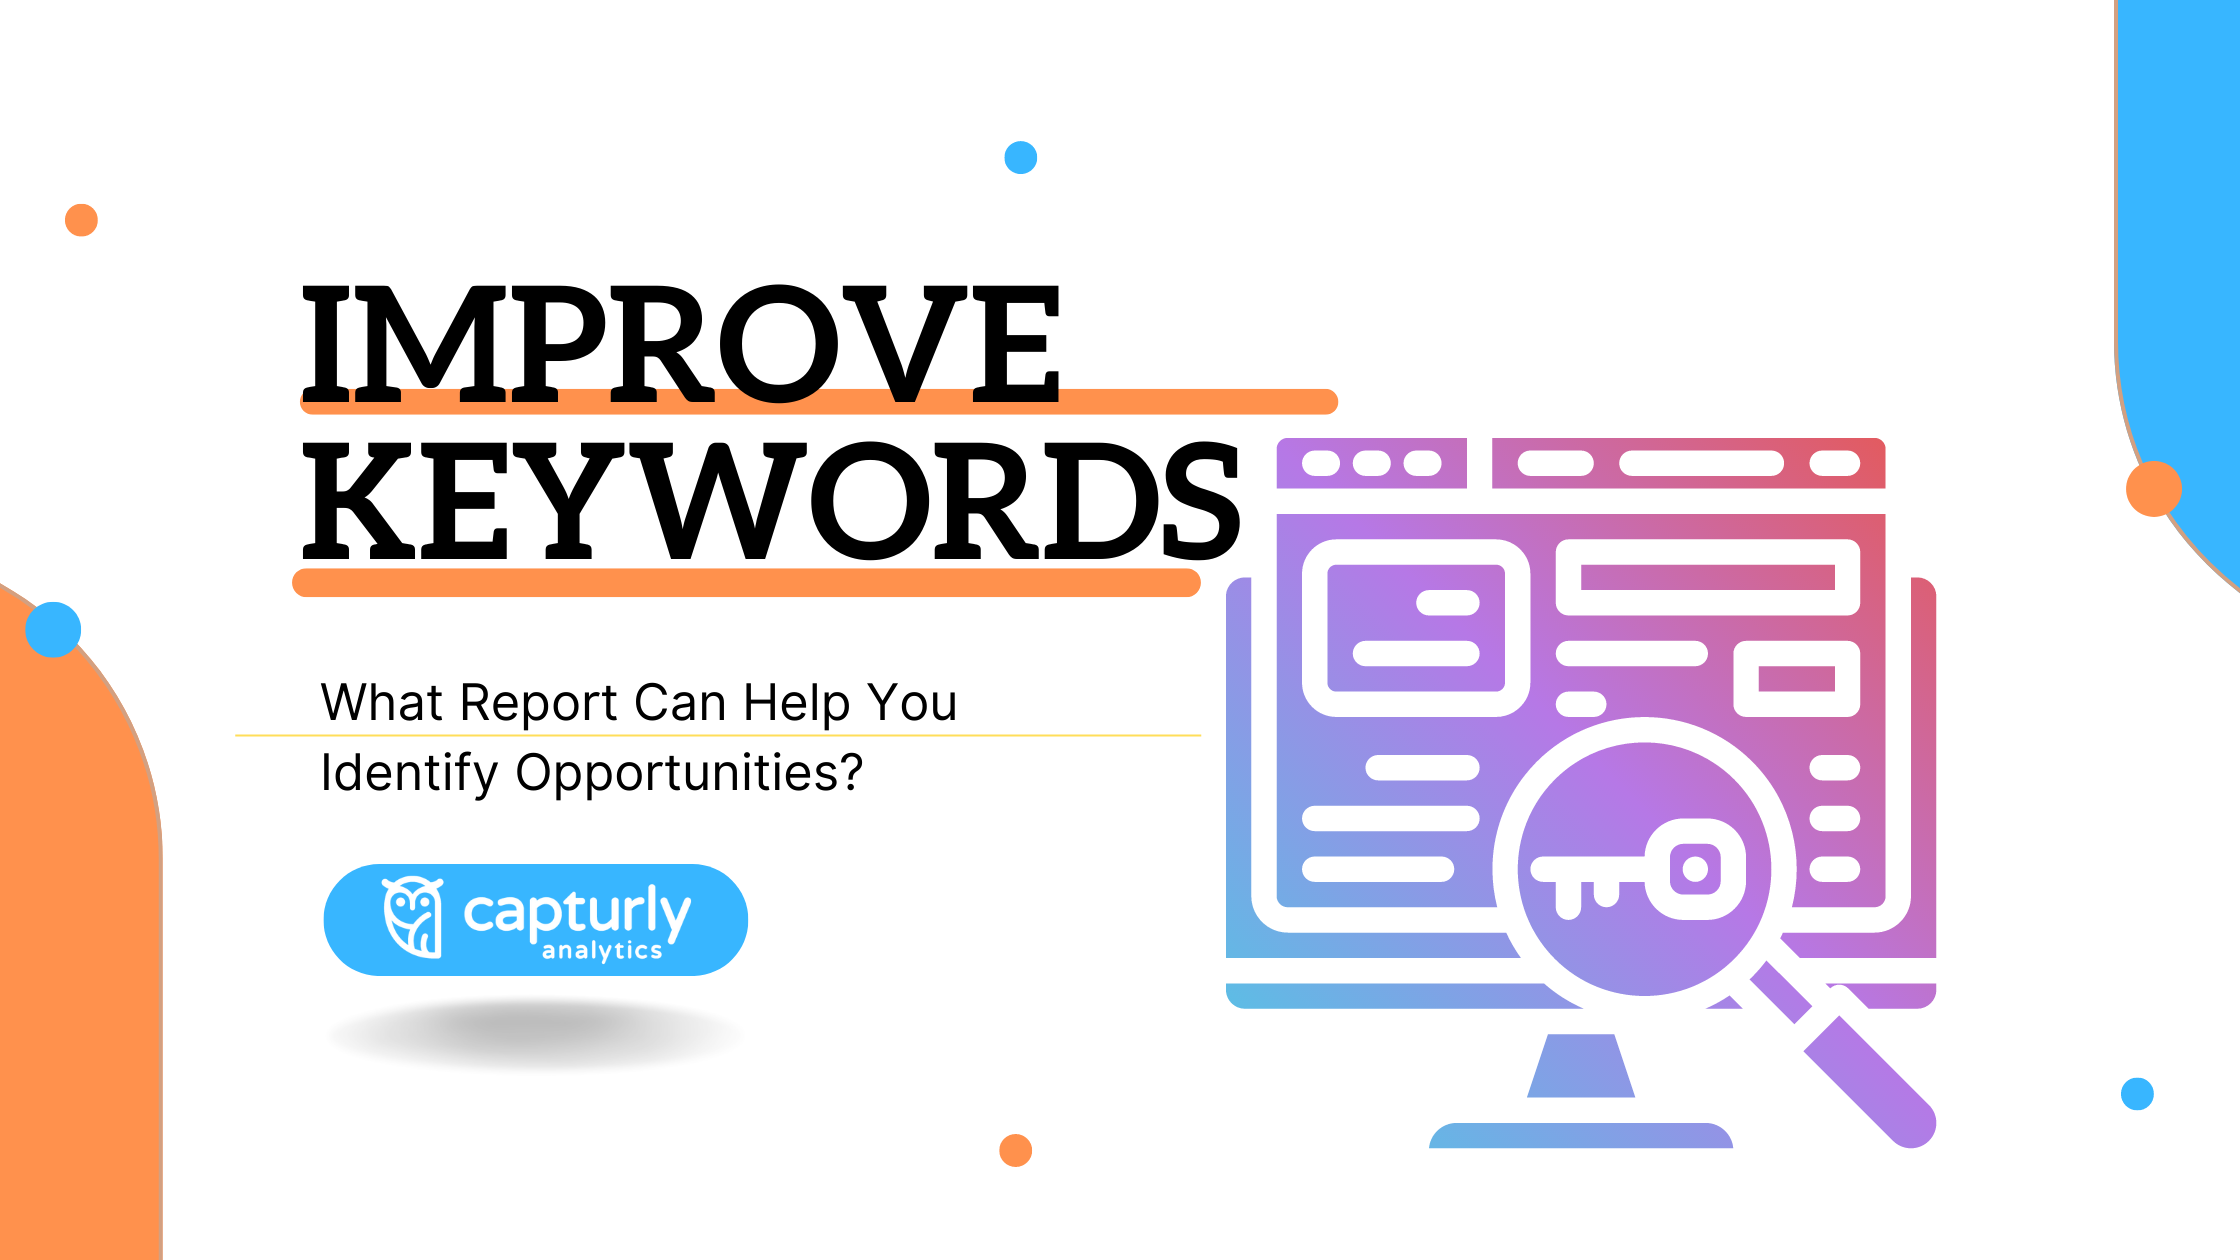 What Report Can Help You Identify Opportunities to Improve Your Keywords and Ads?